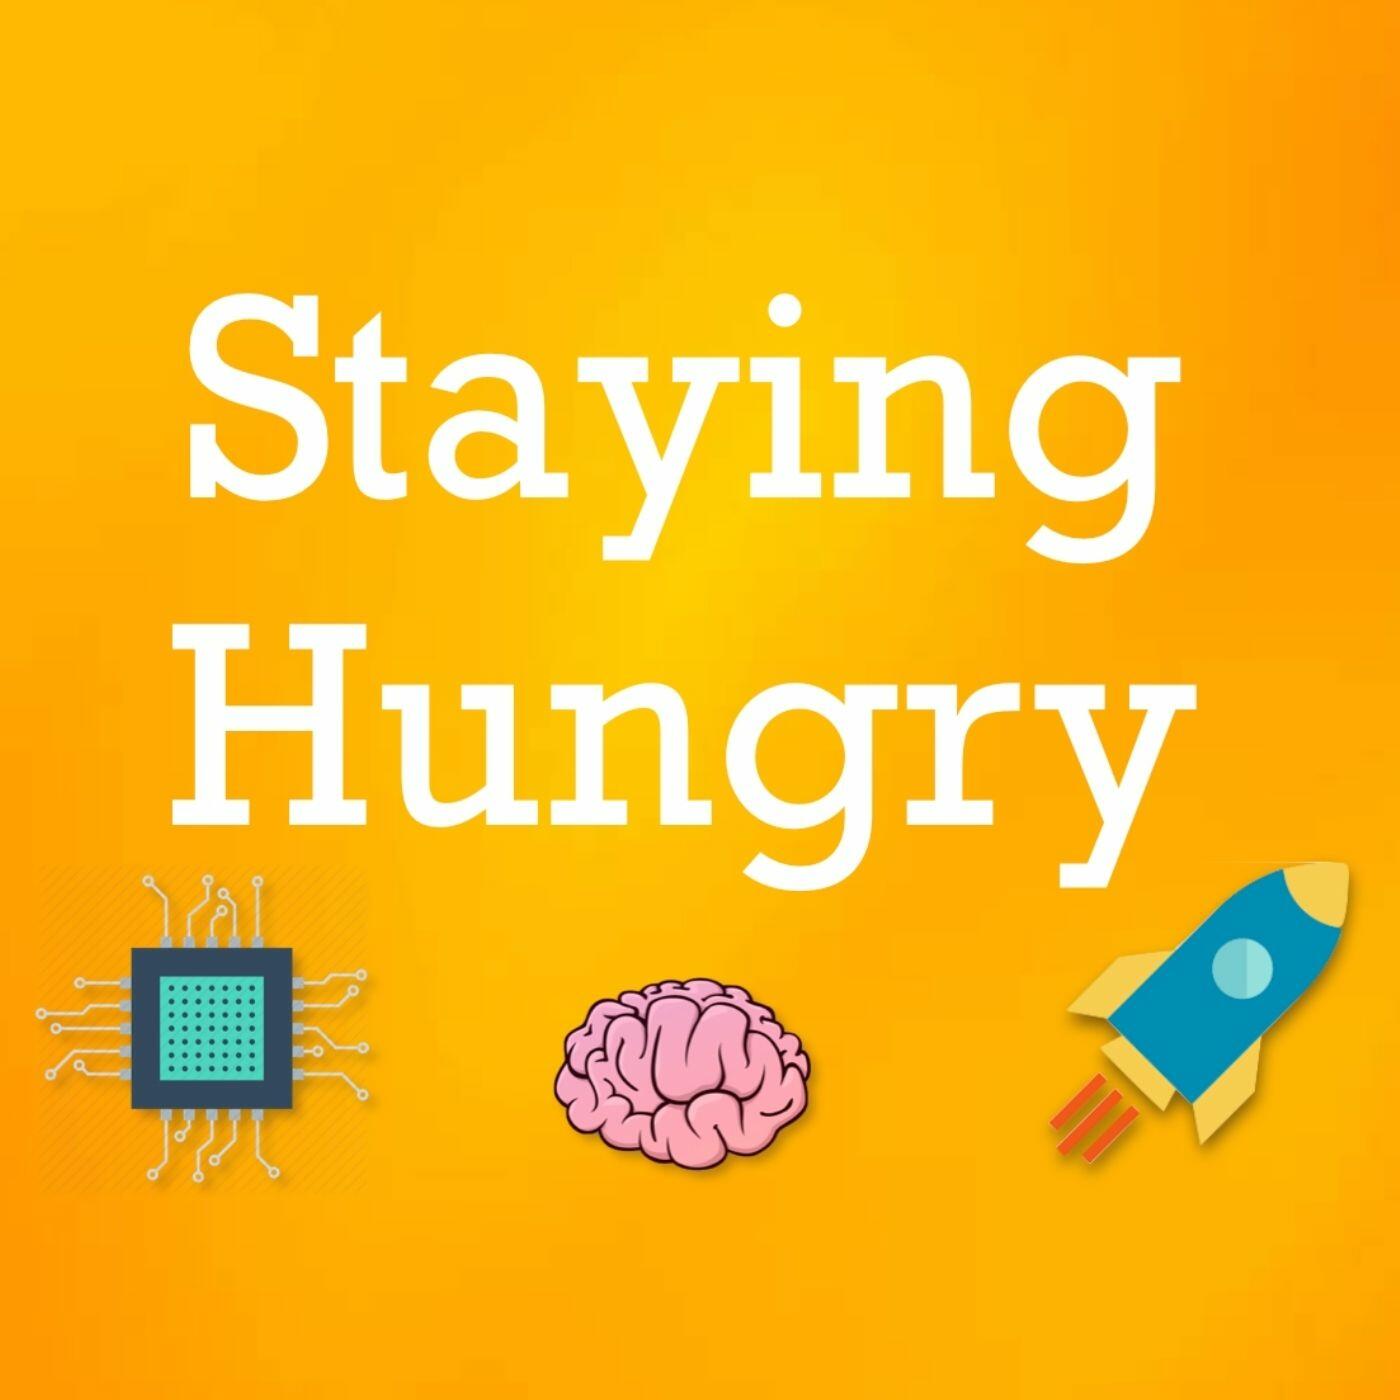 Stay hungry фестиваль. We stay Hunger. We stay hungry.